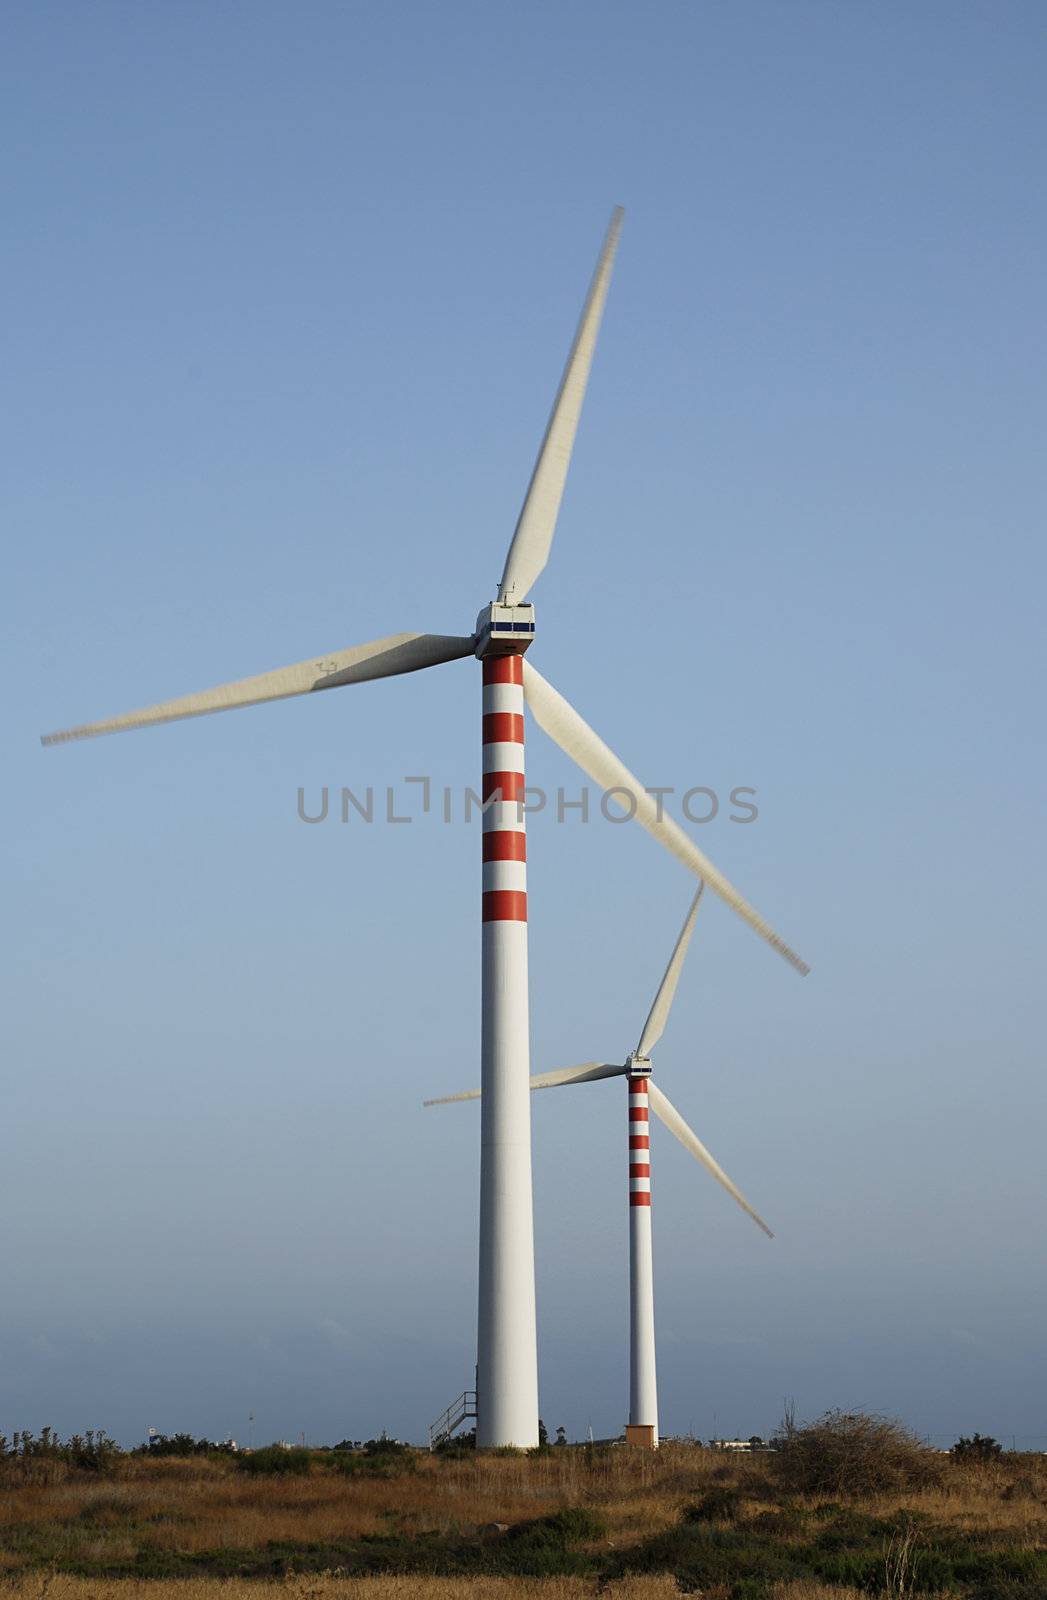 Two wind turbines generating energy - with slight motion blur